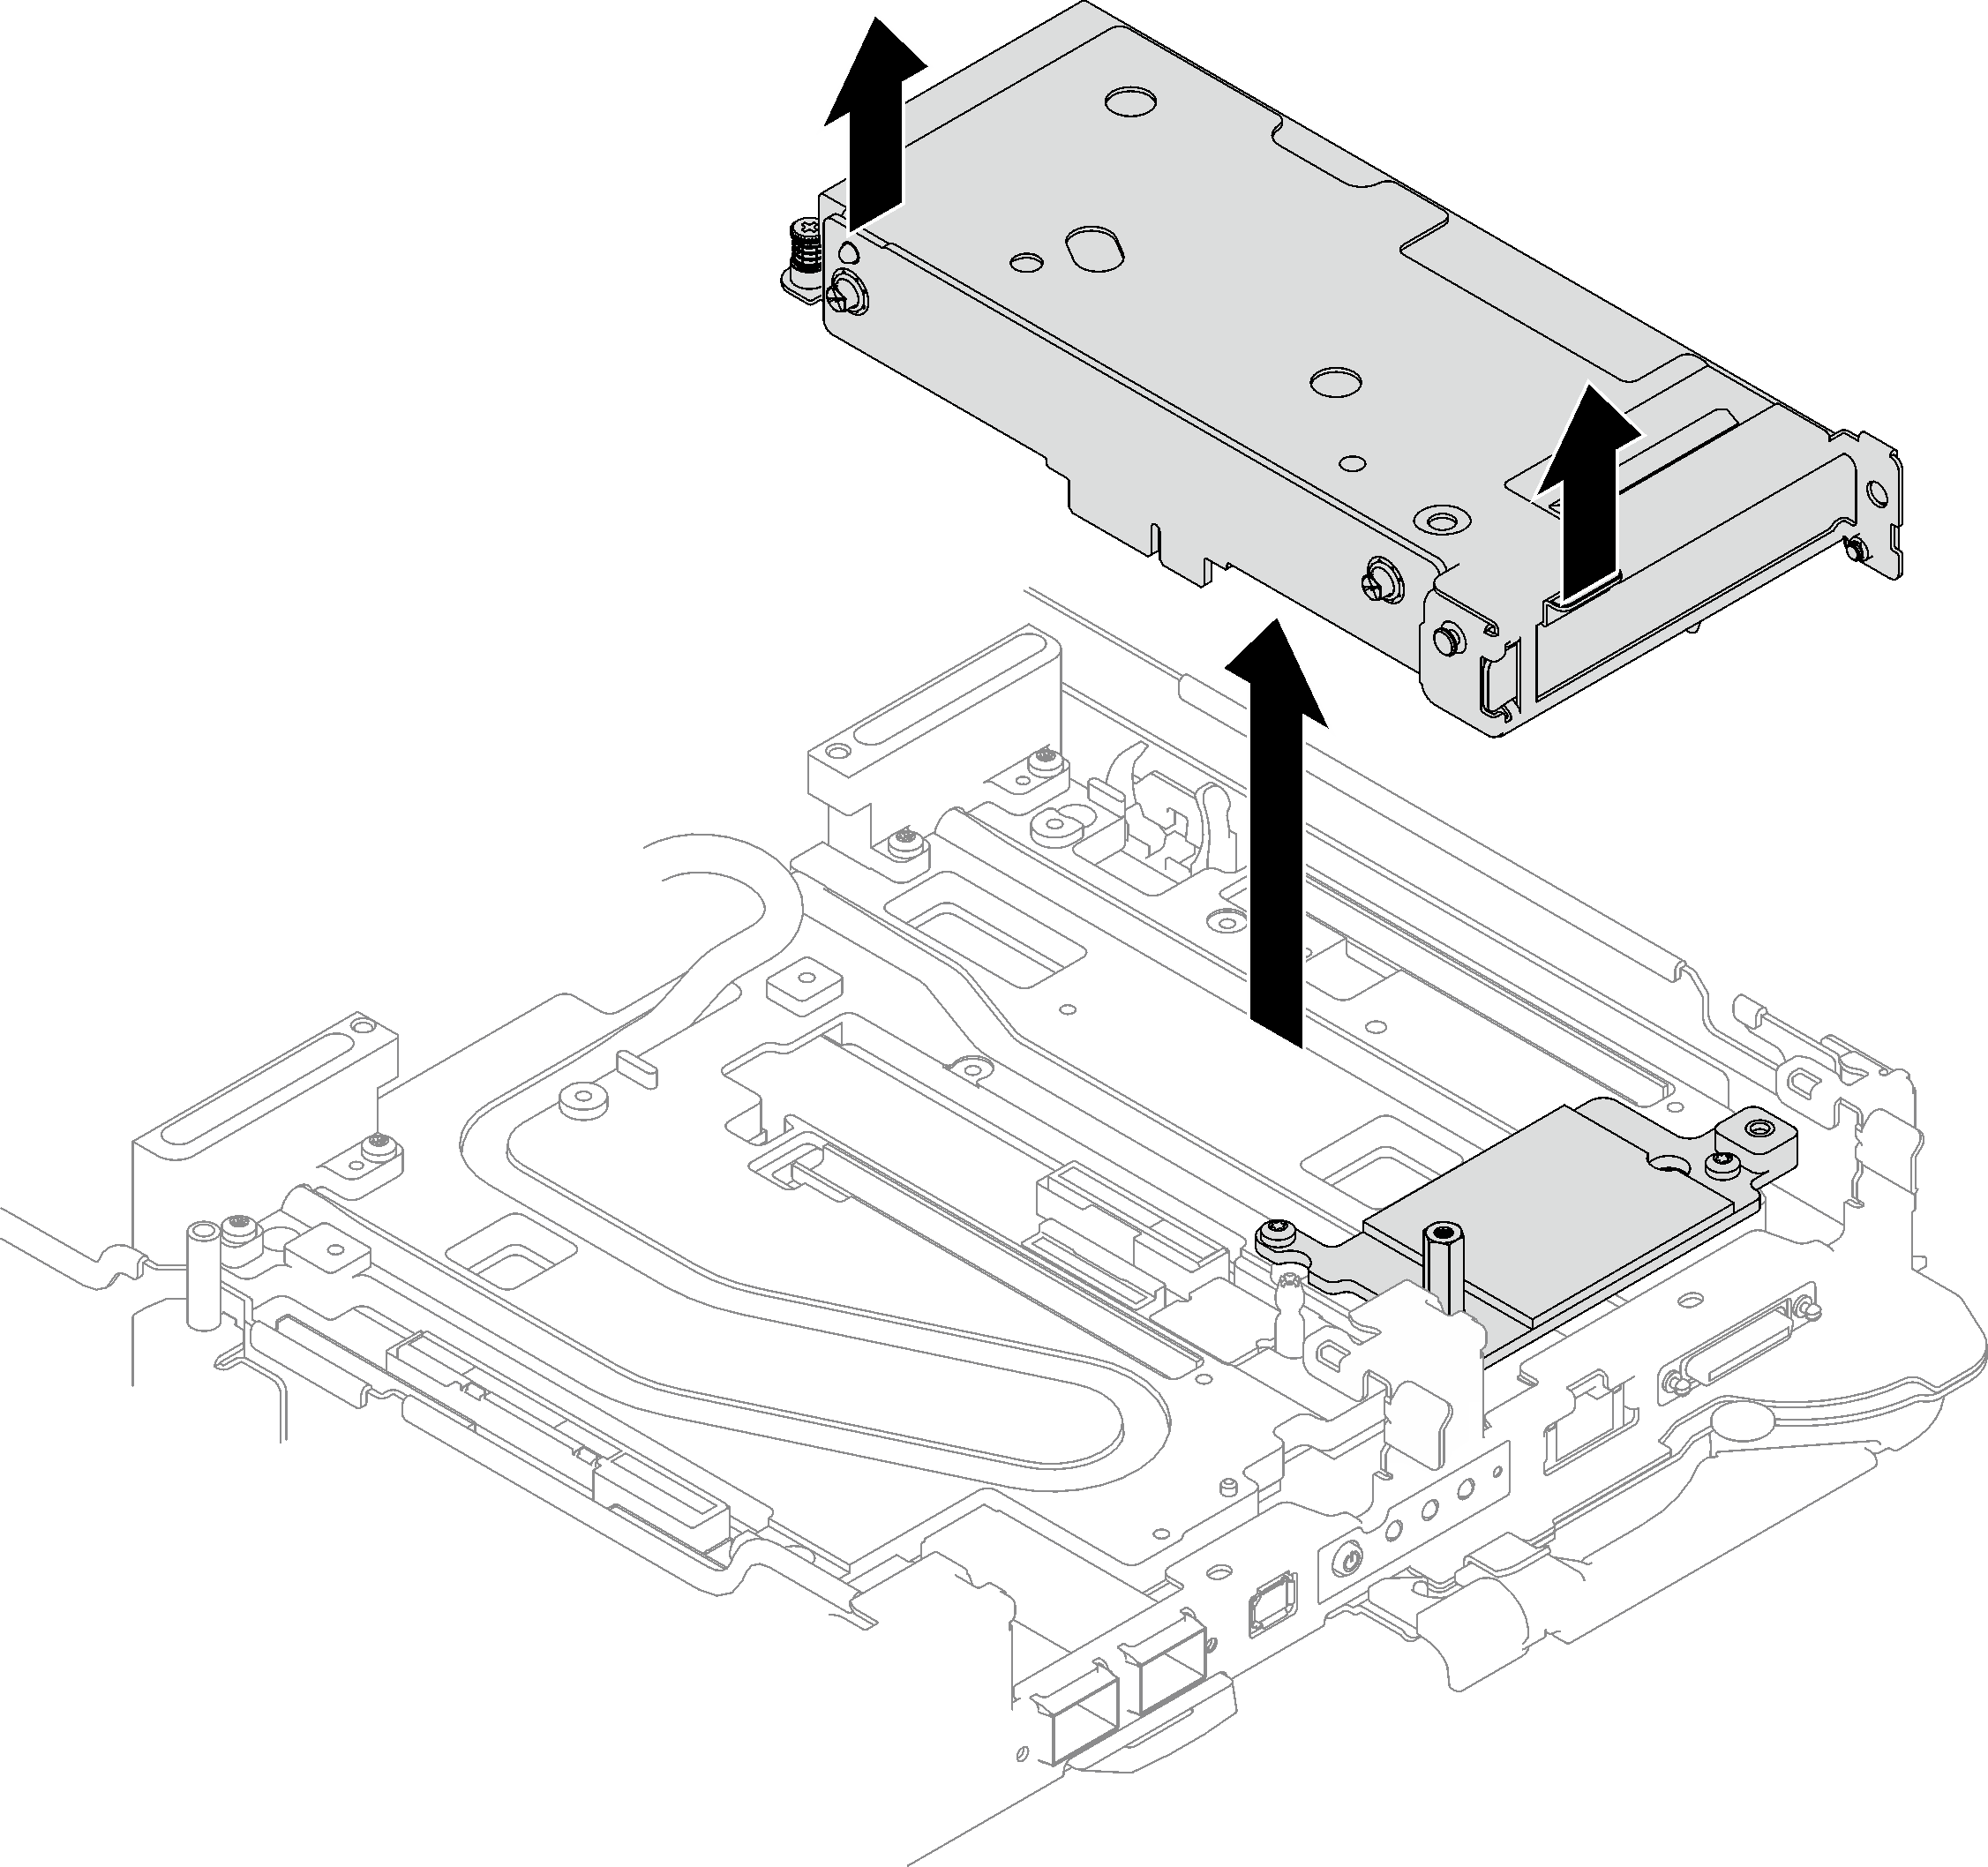 Loosening the PCIe riser assembly